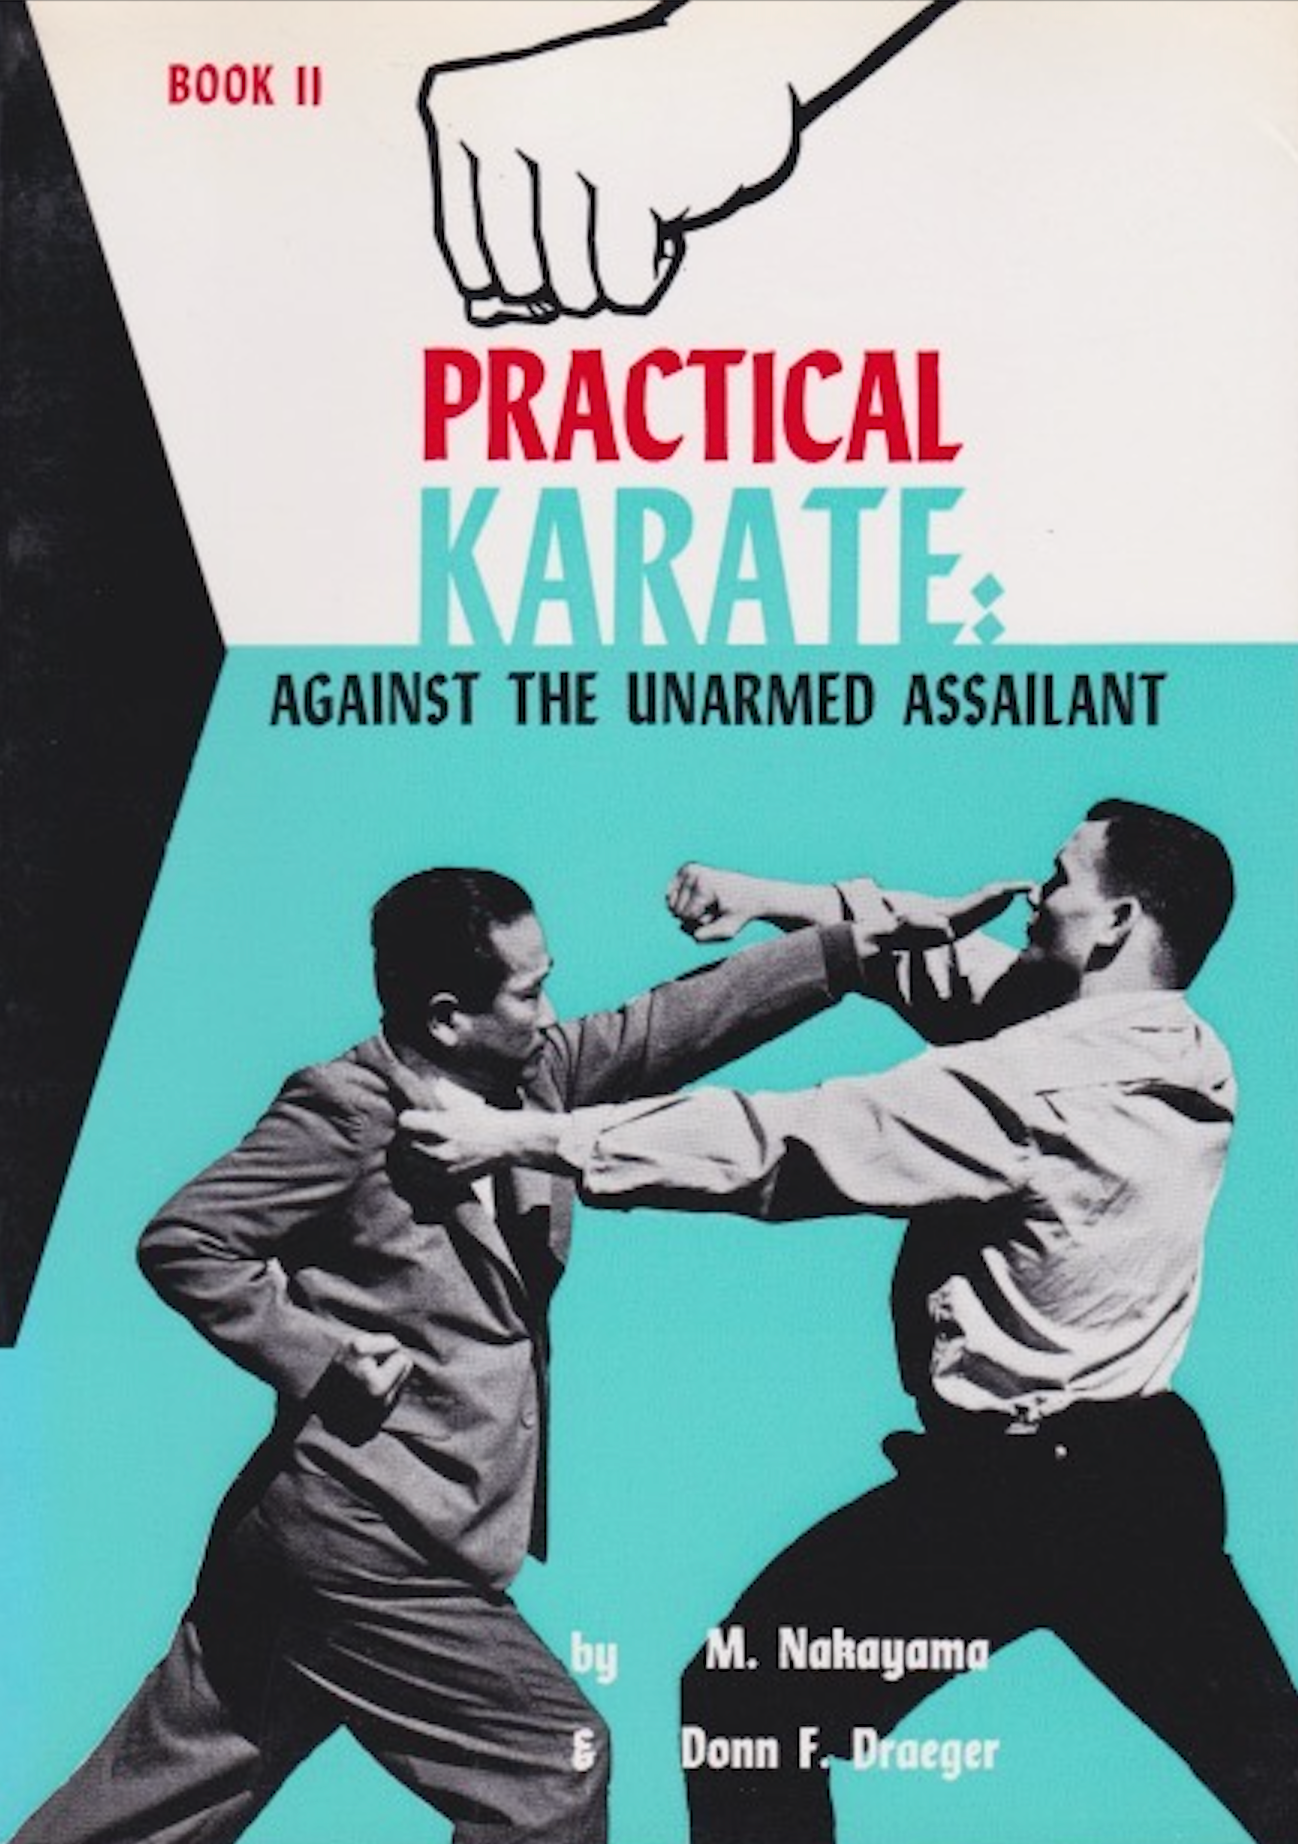 Practical Karate Book 2: Against the Unarmed Assailant by Masatoshi Nakayama & Donn Draeger (Preowned)